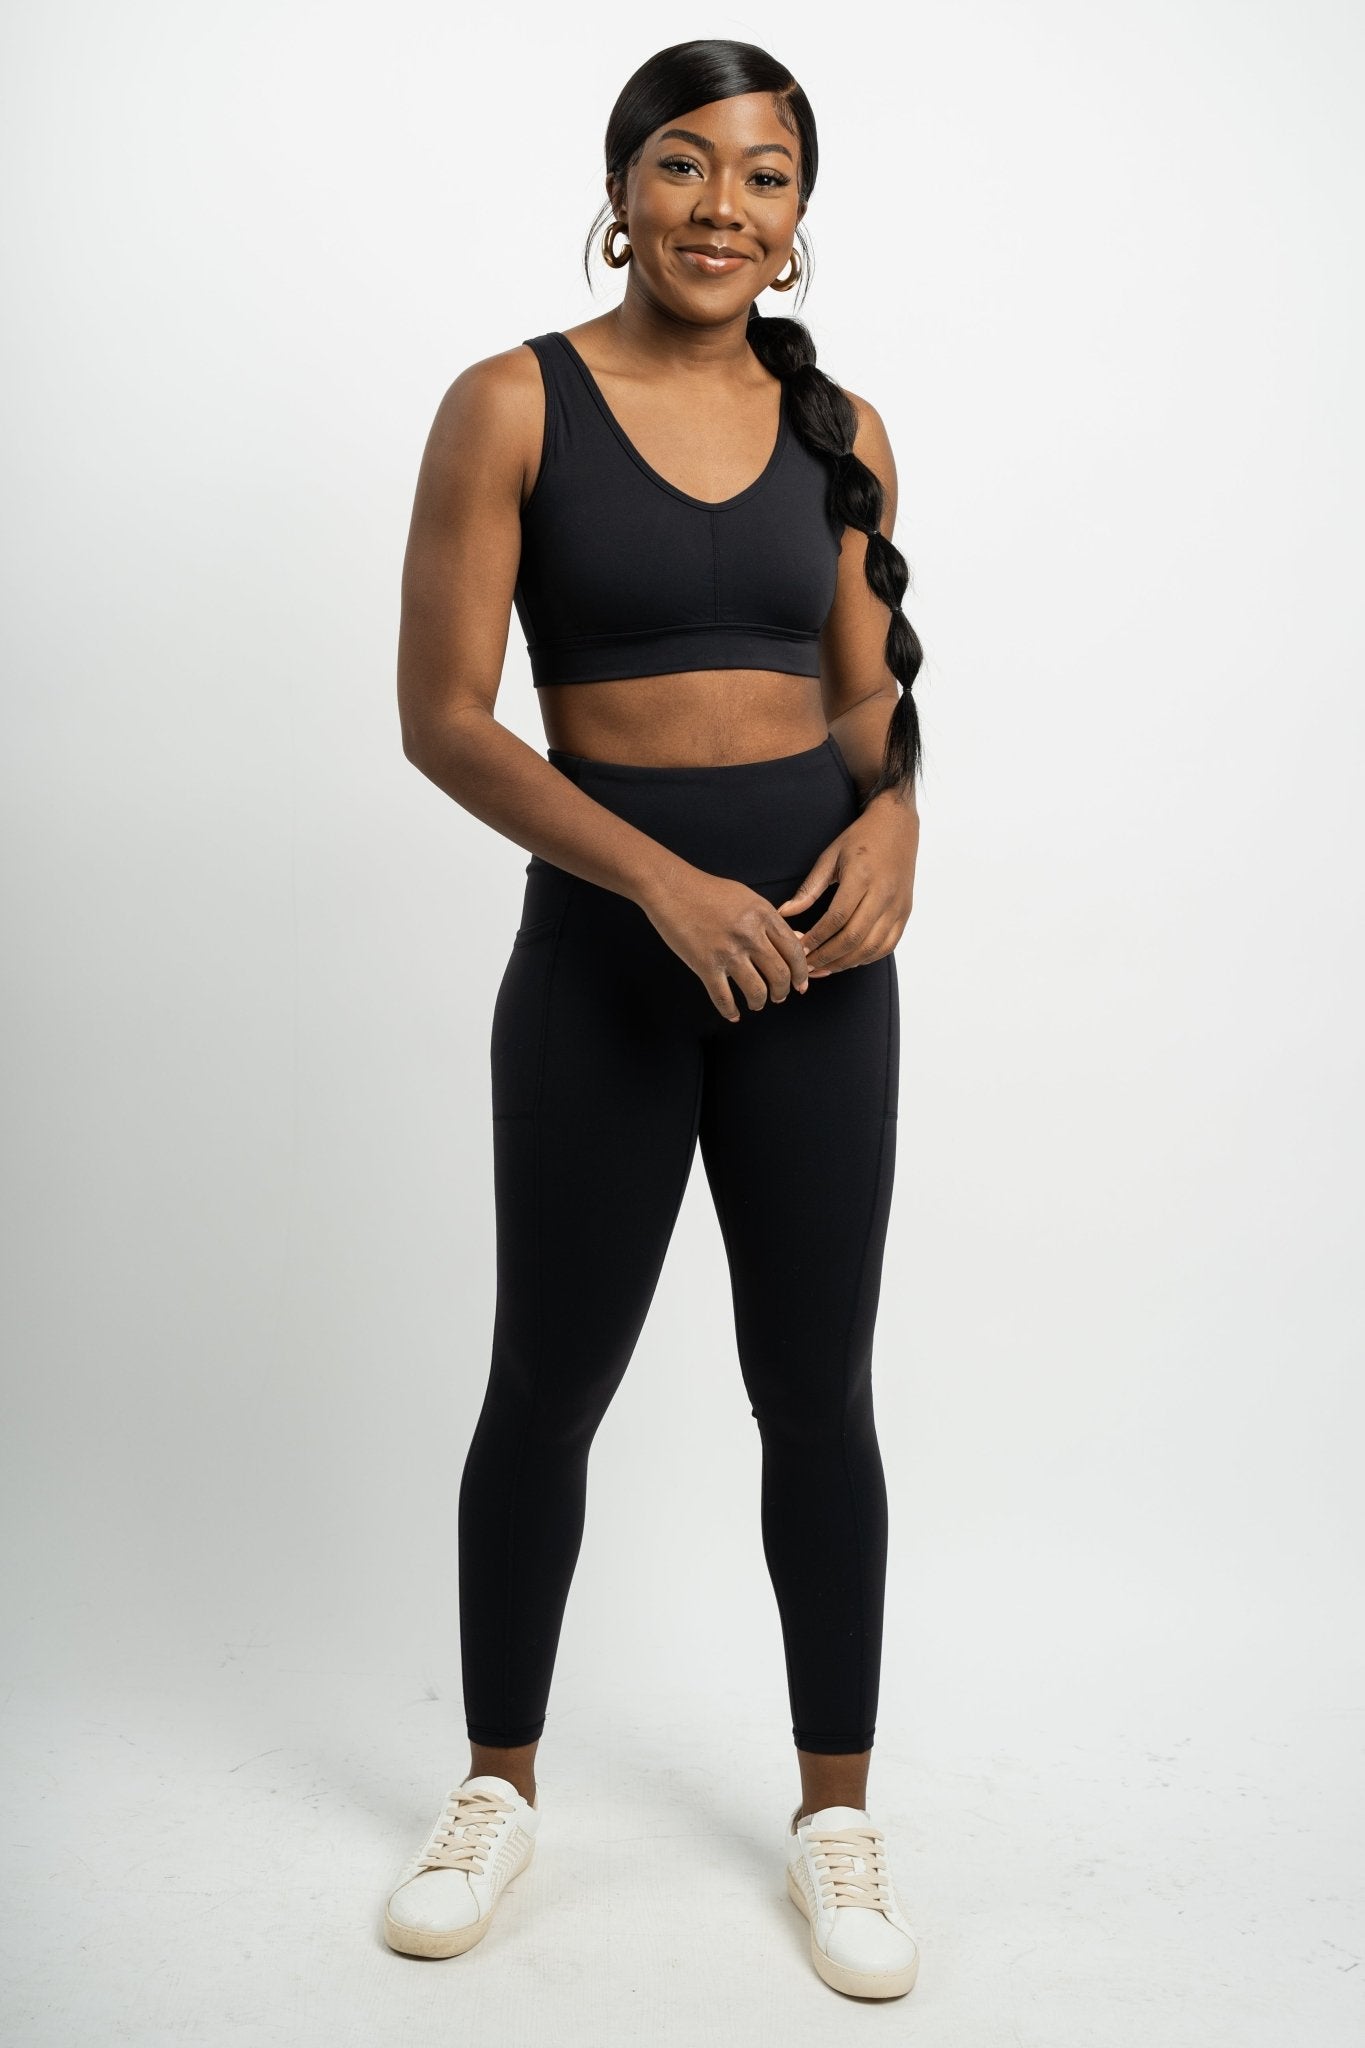 Shop Affordable, Cute, High Quality Leggings and Tights for Women